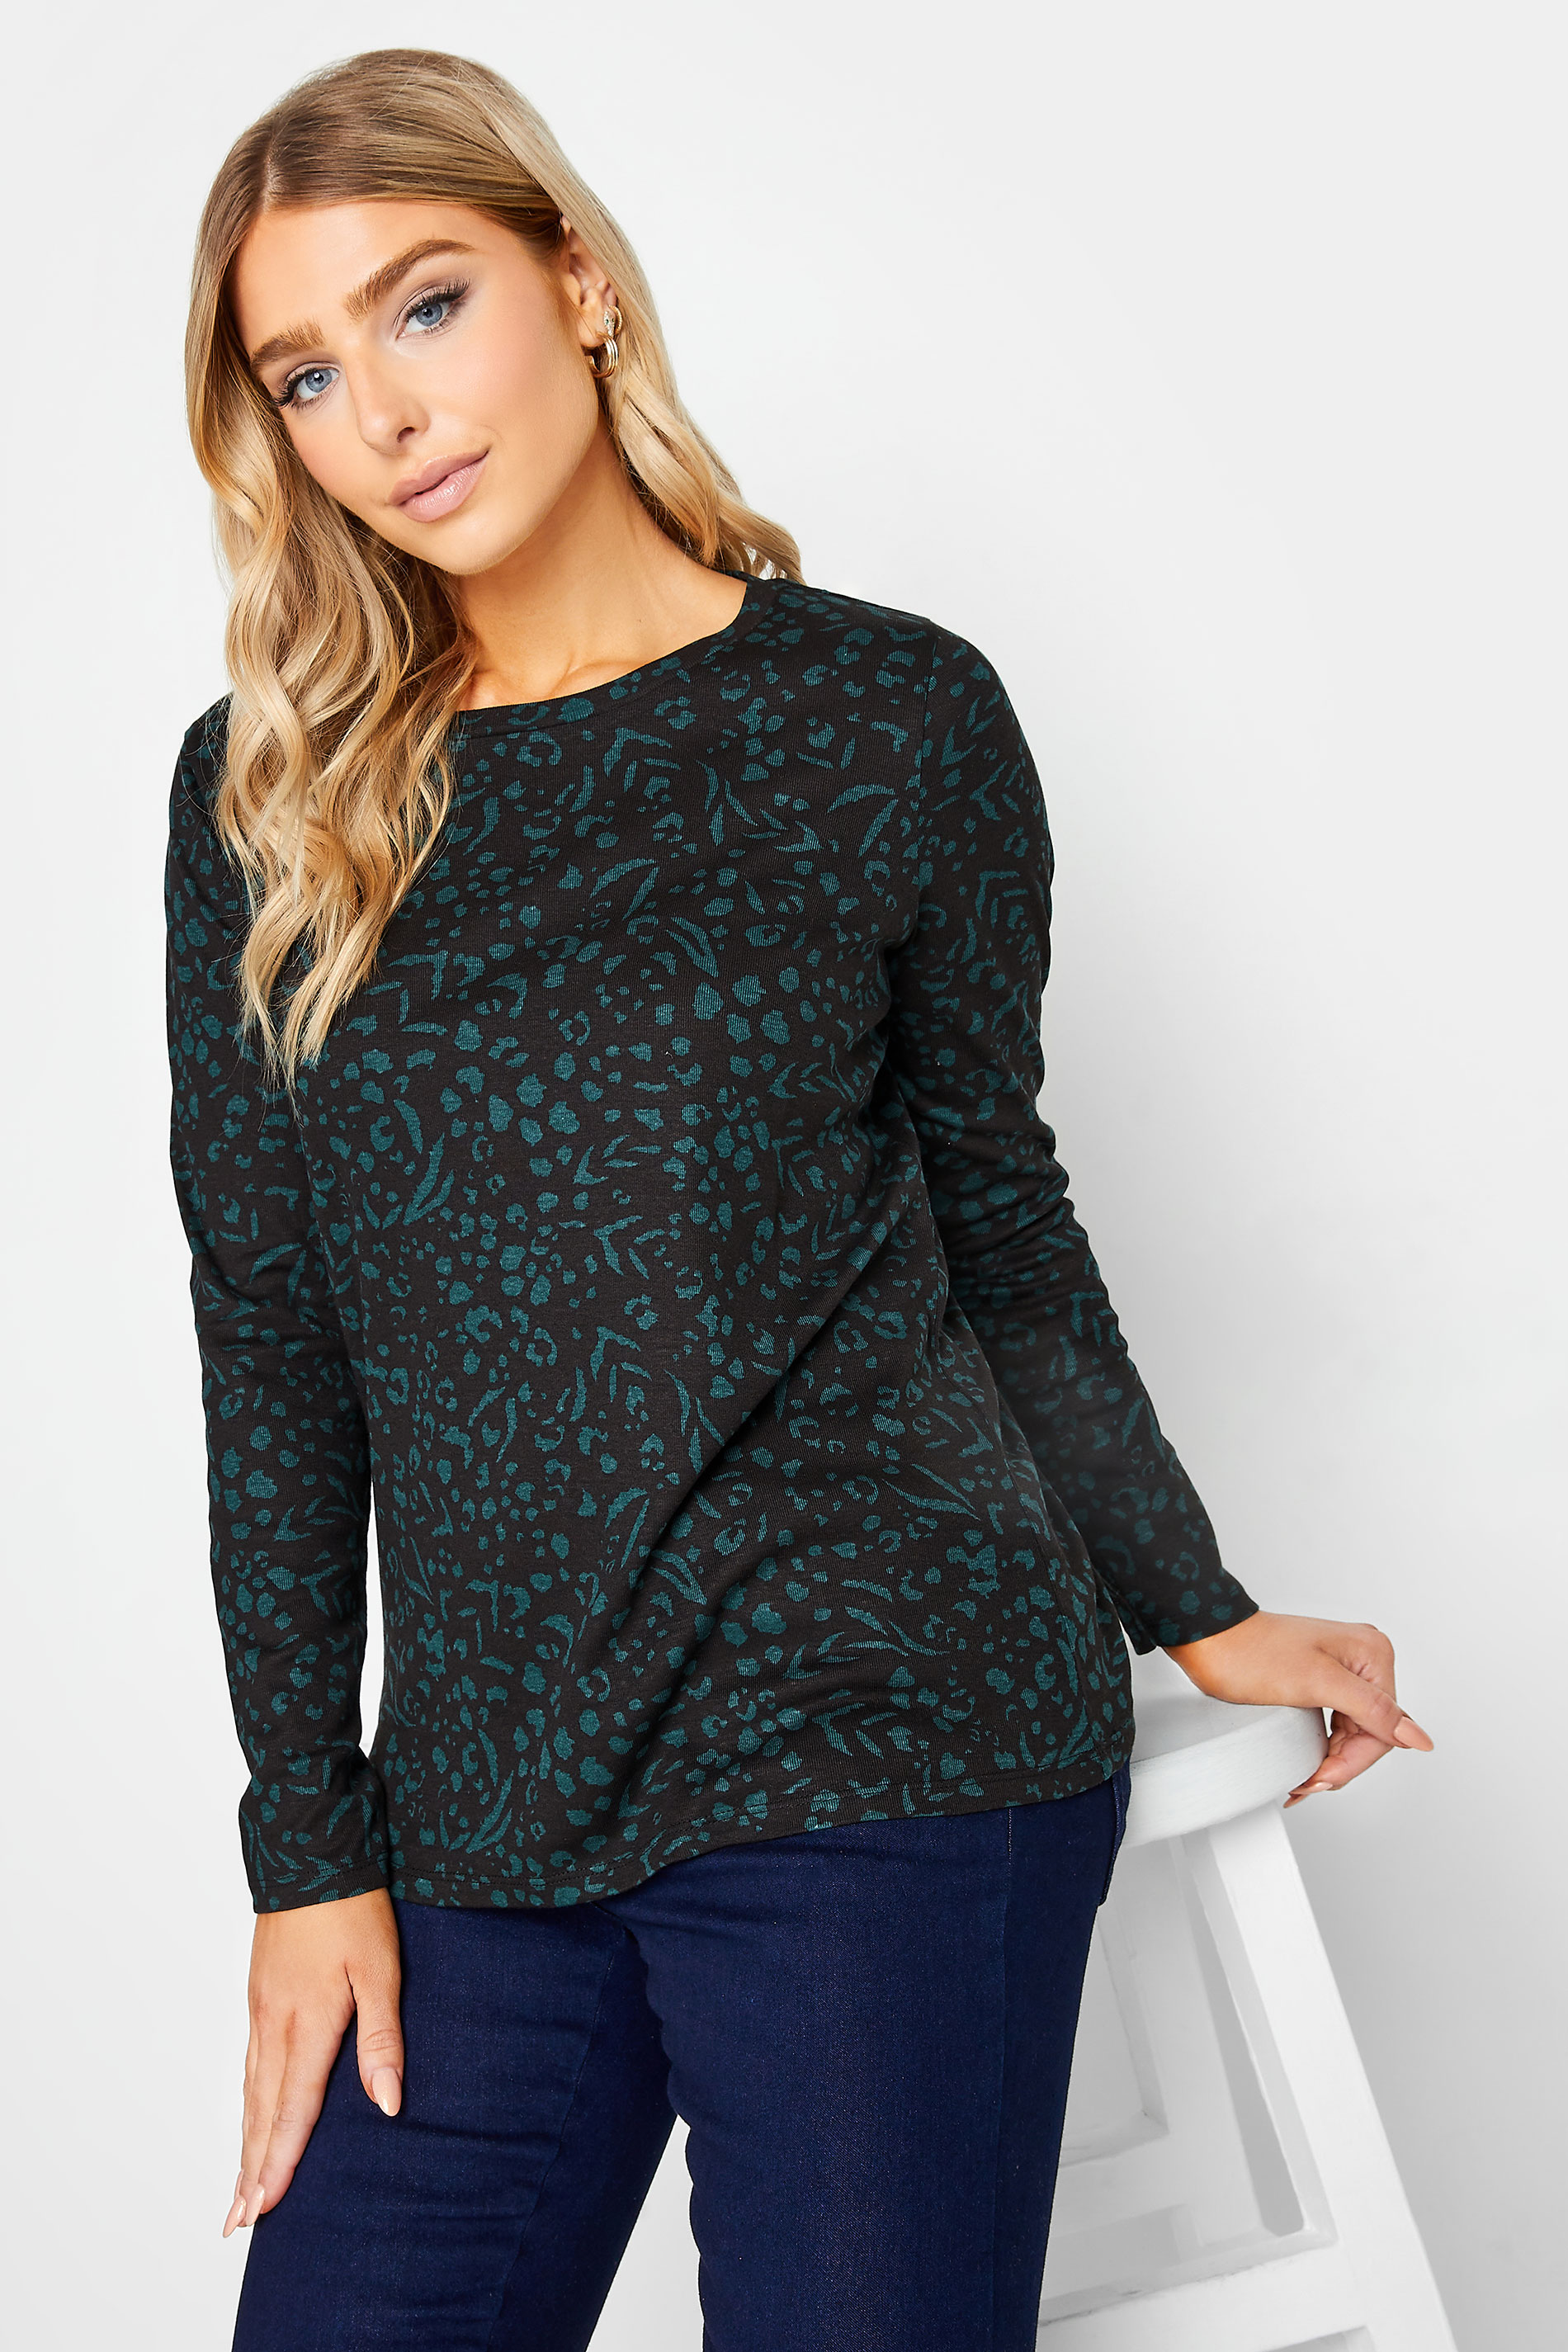 M&Co Green Teal Animal Print Long Sleeve Cotton Top | M&Co 2